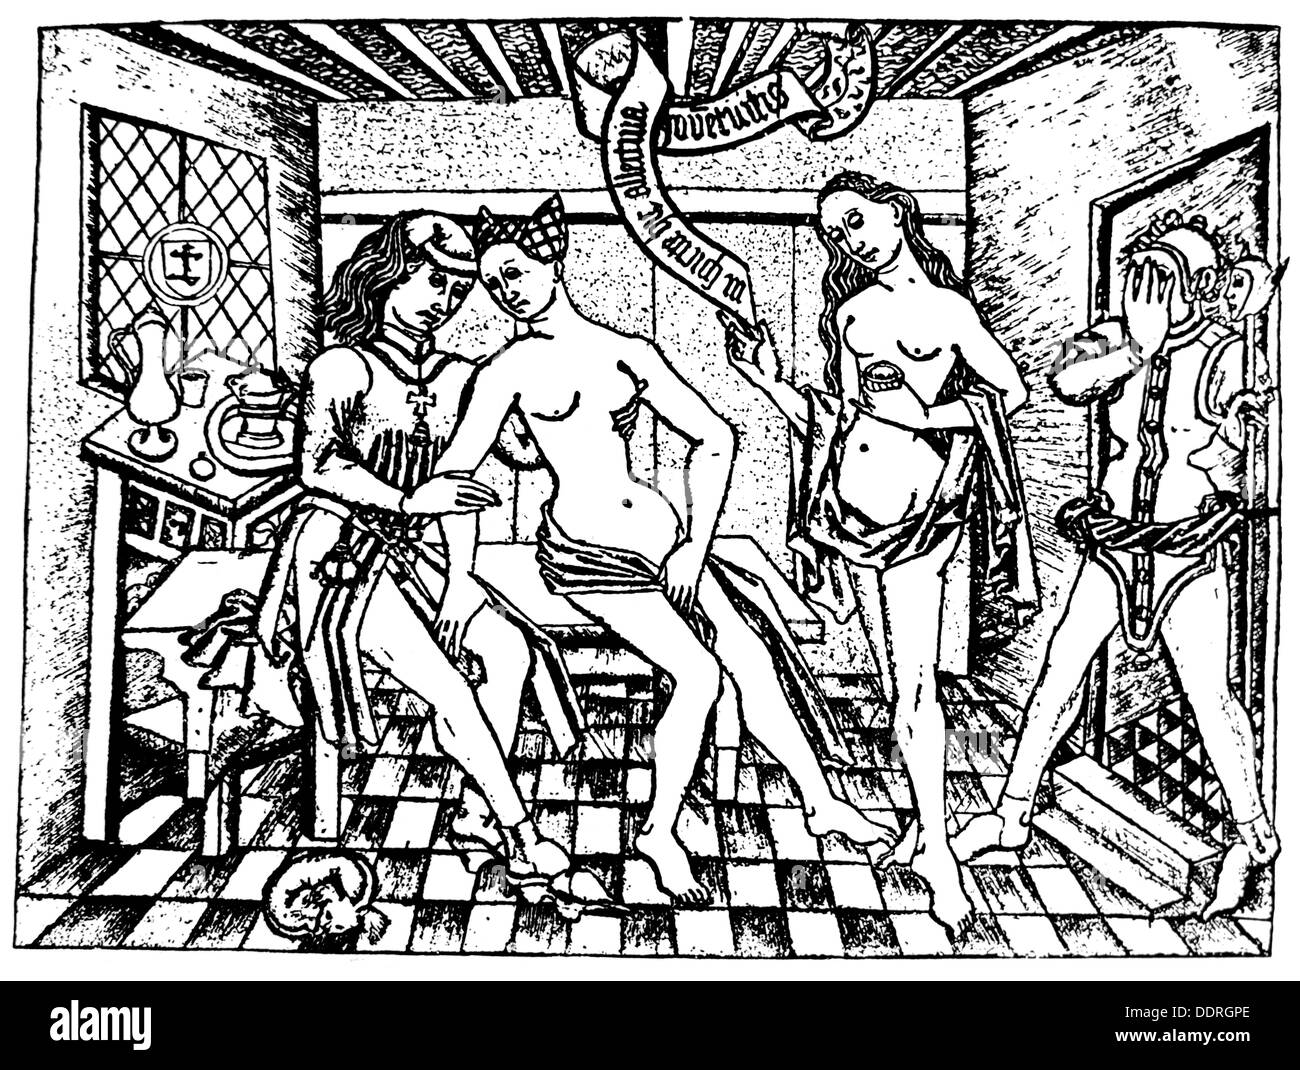 people, prostitution, womens house, woodcut, 15th century, brothel, whorehouse, brothels, whorehouses, prostitute, prostitutes, woman, men, man, punter, client, punters, clients, sex, nude, Middle Ages, fool, tomfool, saphead, sap, fools, tomfools